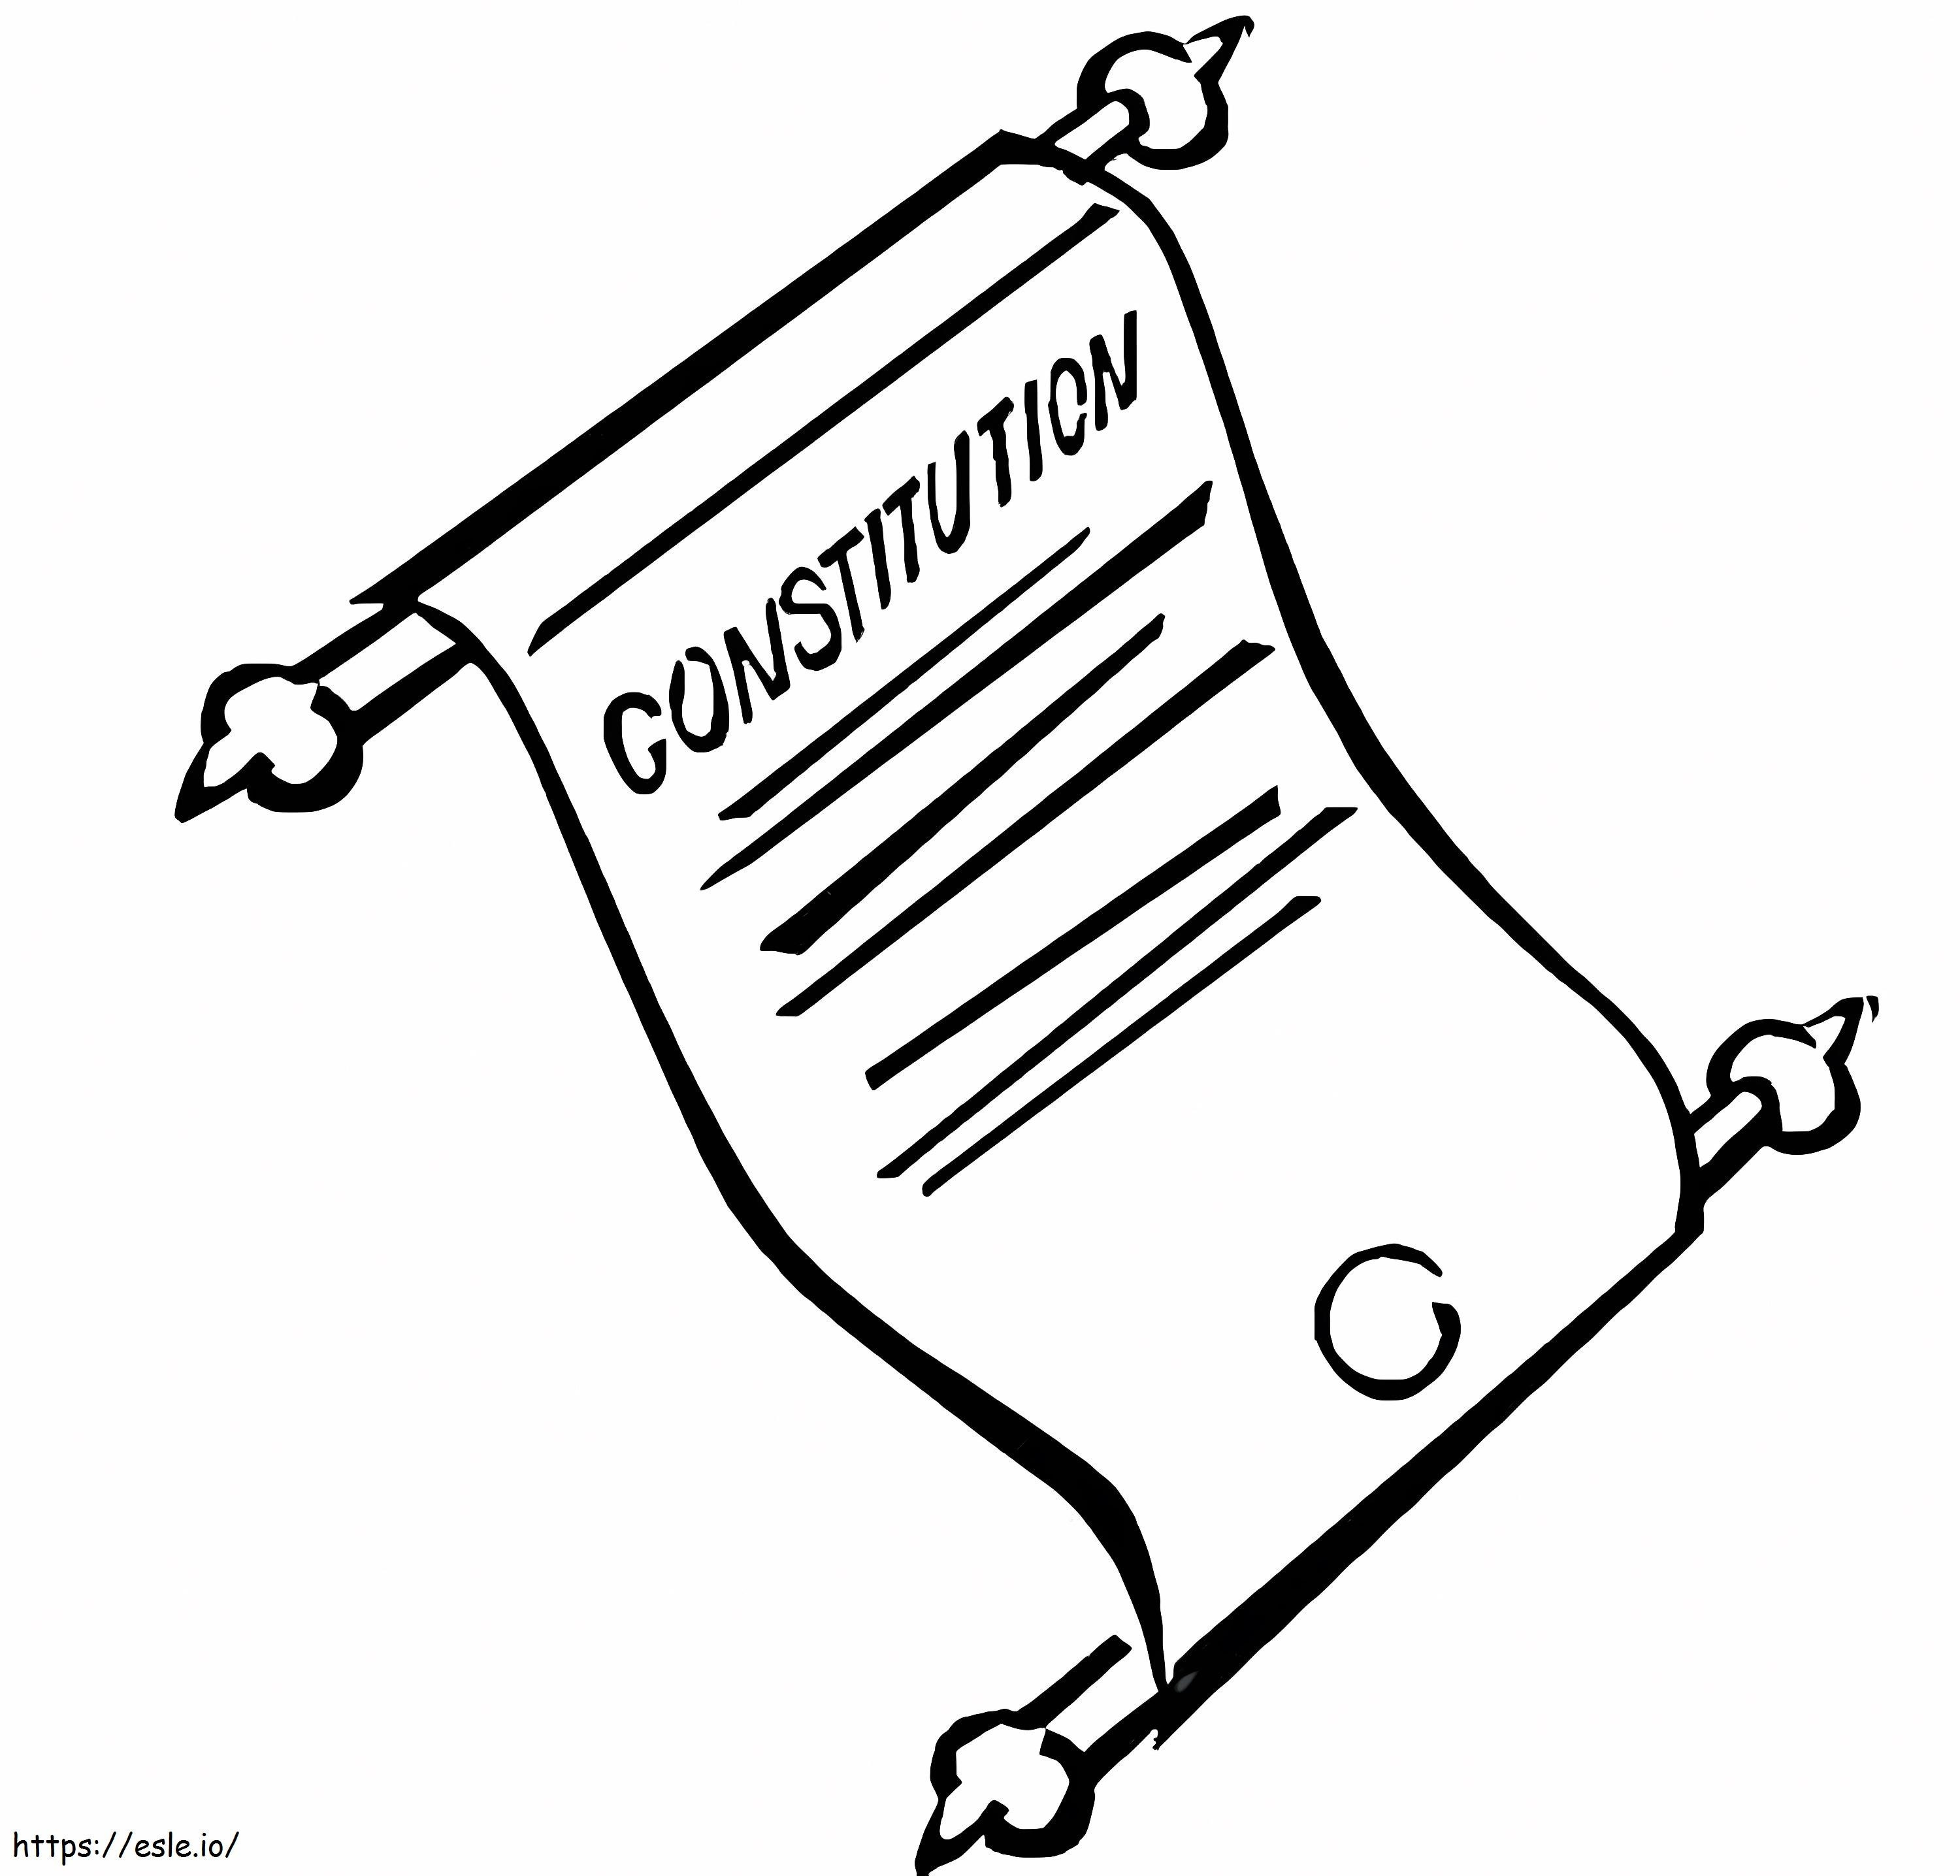 Constitution coloring page